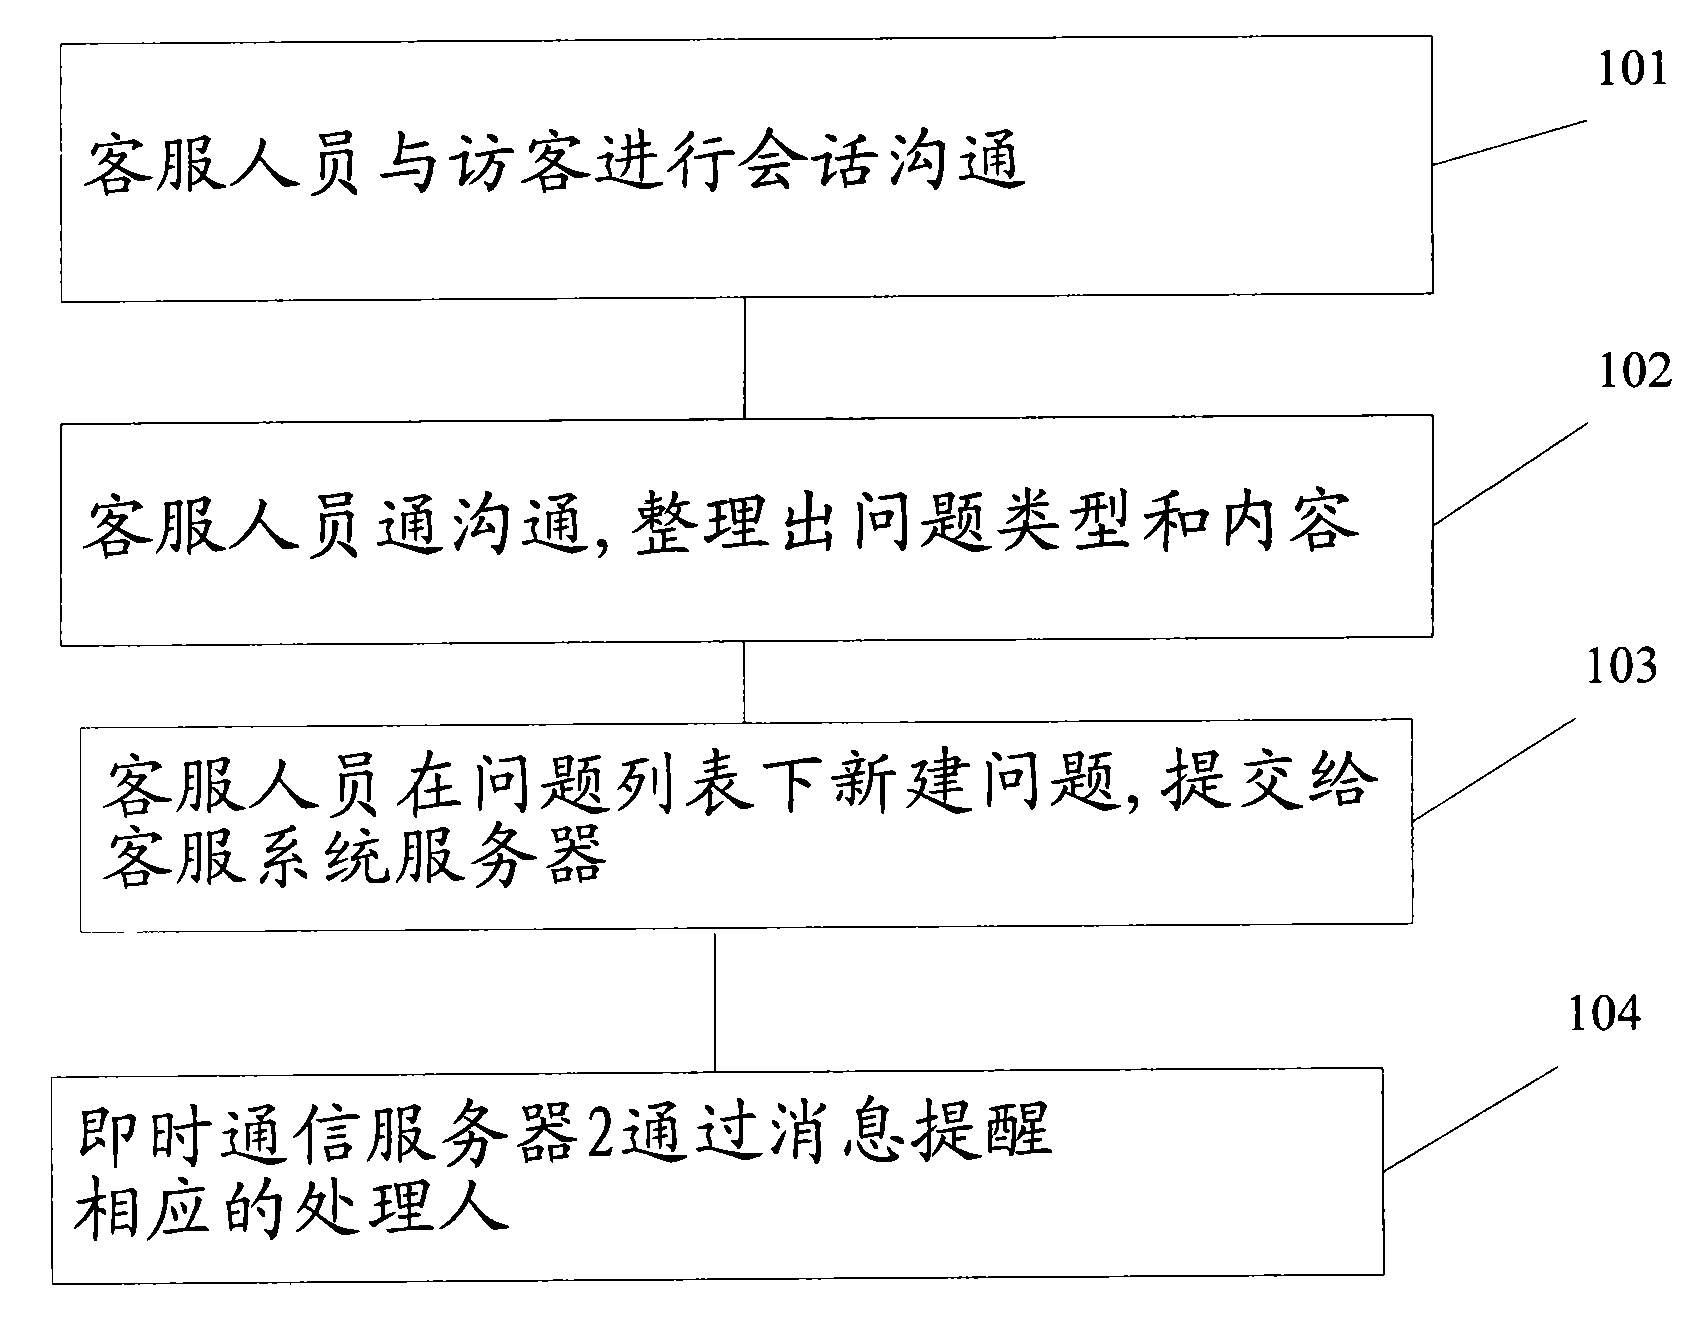 Method and system for submitting user questions through online customer service system